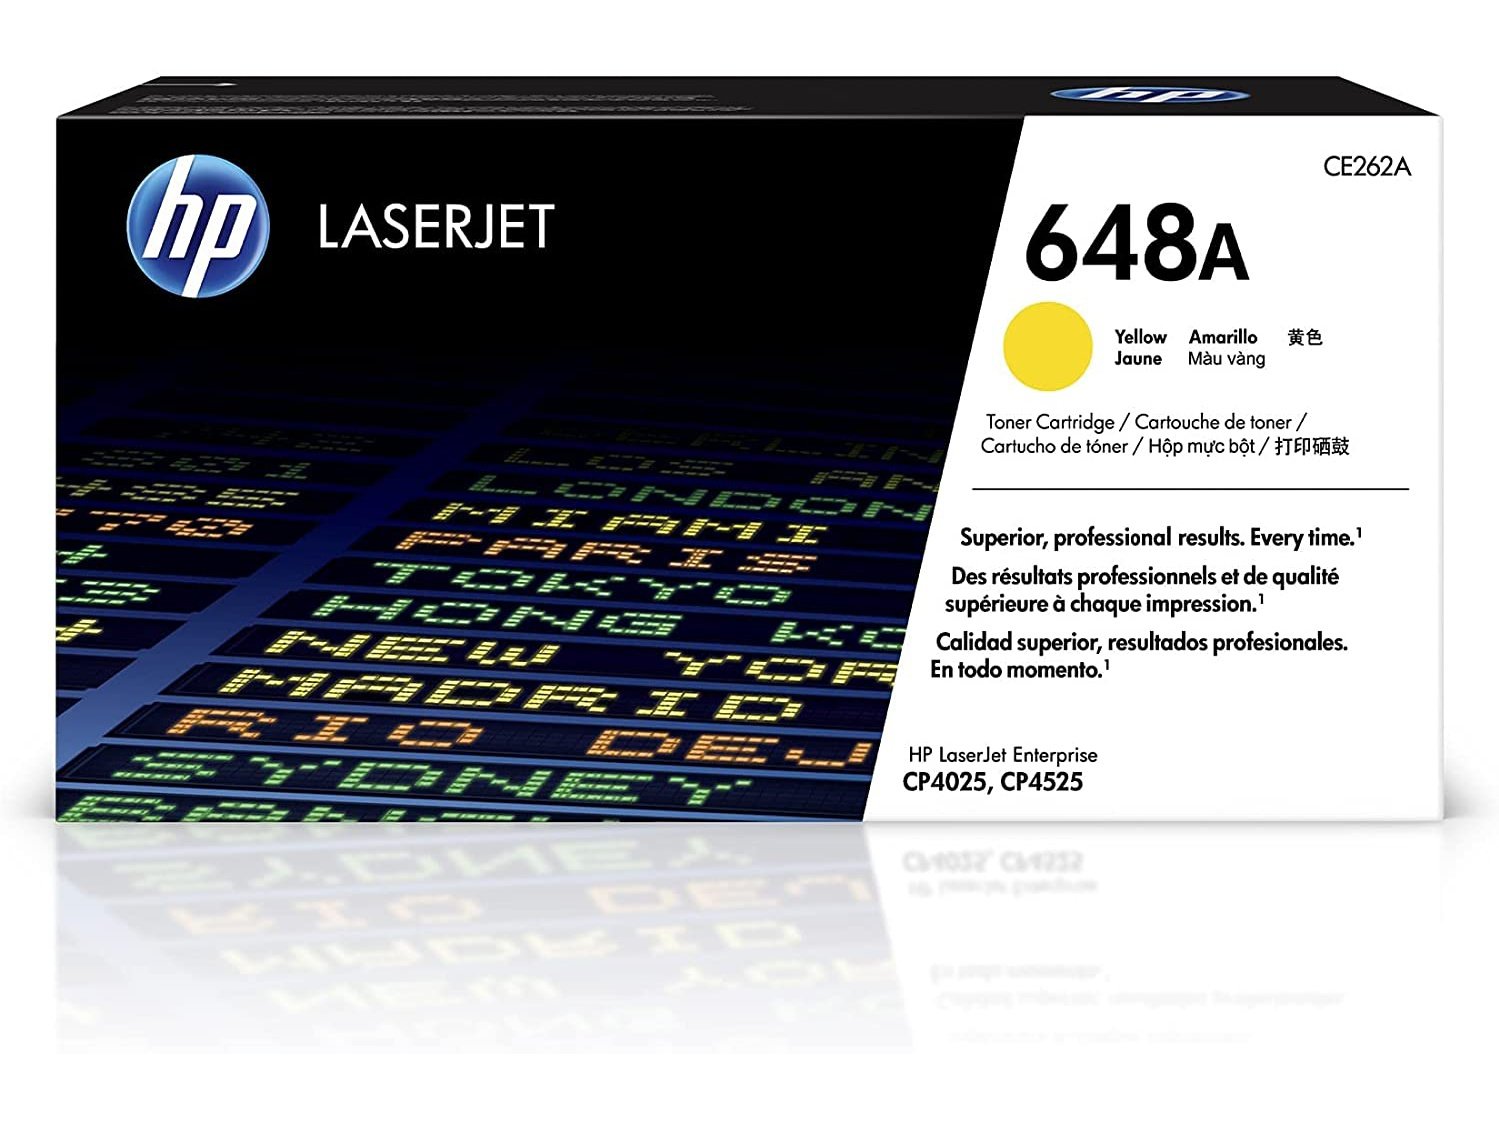 ICU Compatible/ OEM Get HP ICUCE262A Yields 11000 Pages Yellow CE262A Laser Toner Cartridge for Hewlett Packard (HP 648A) CP4025/CP4525